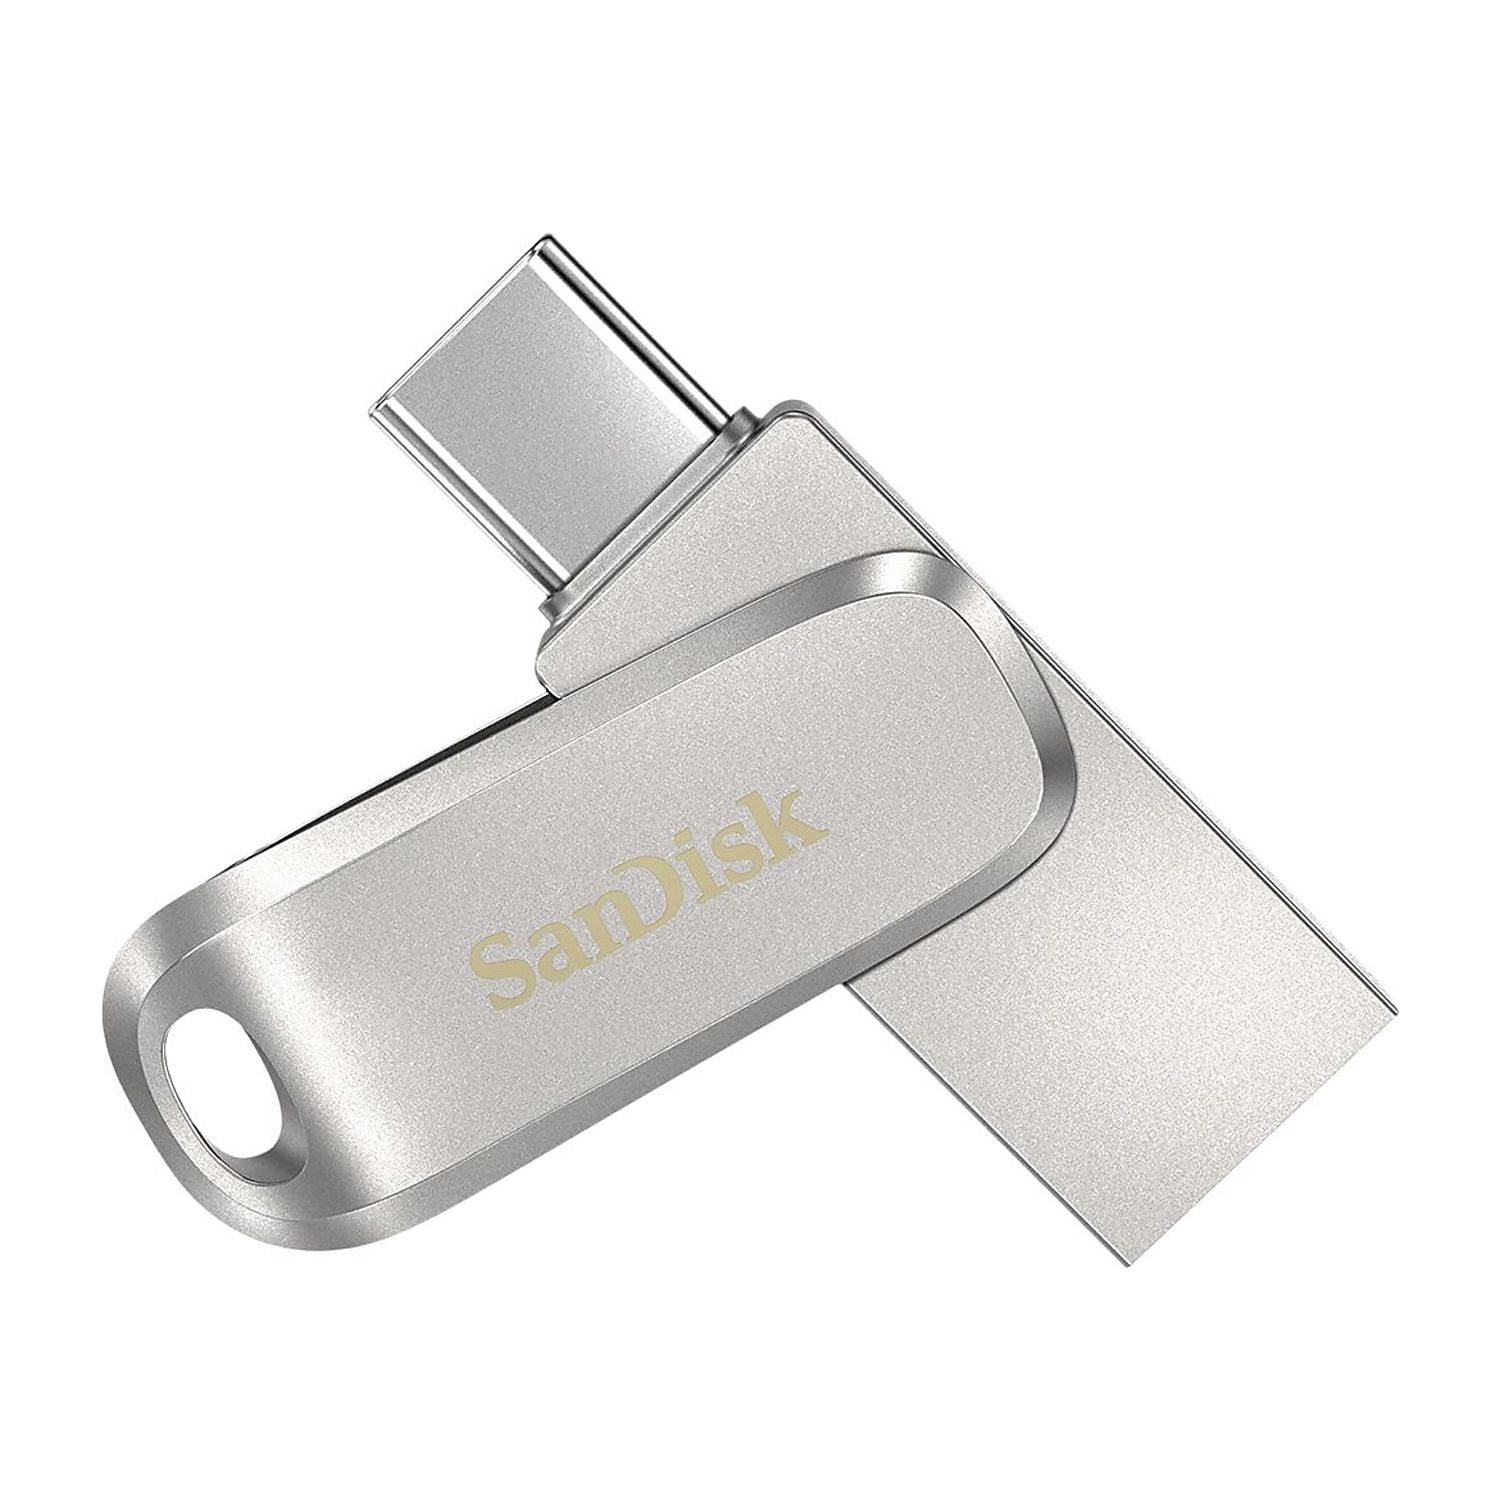 Sandisk SDDDC4-064G-A46 Type-C Ginseng Am USB 3.1 Flash Drive - image 3 of 5